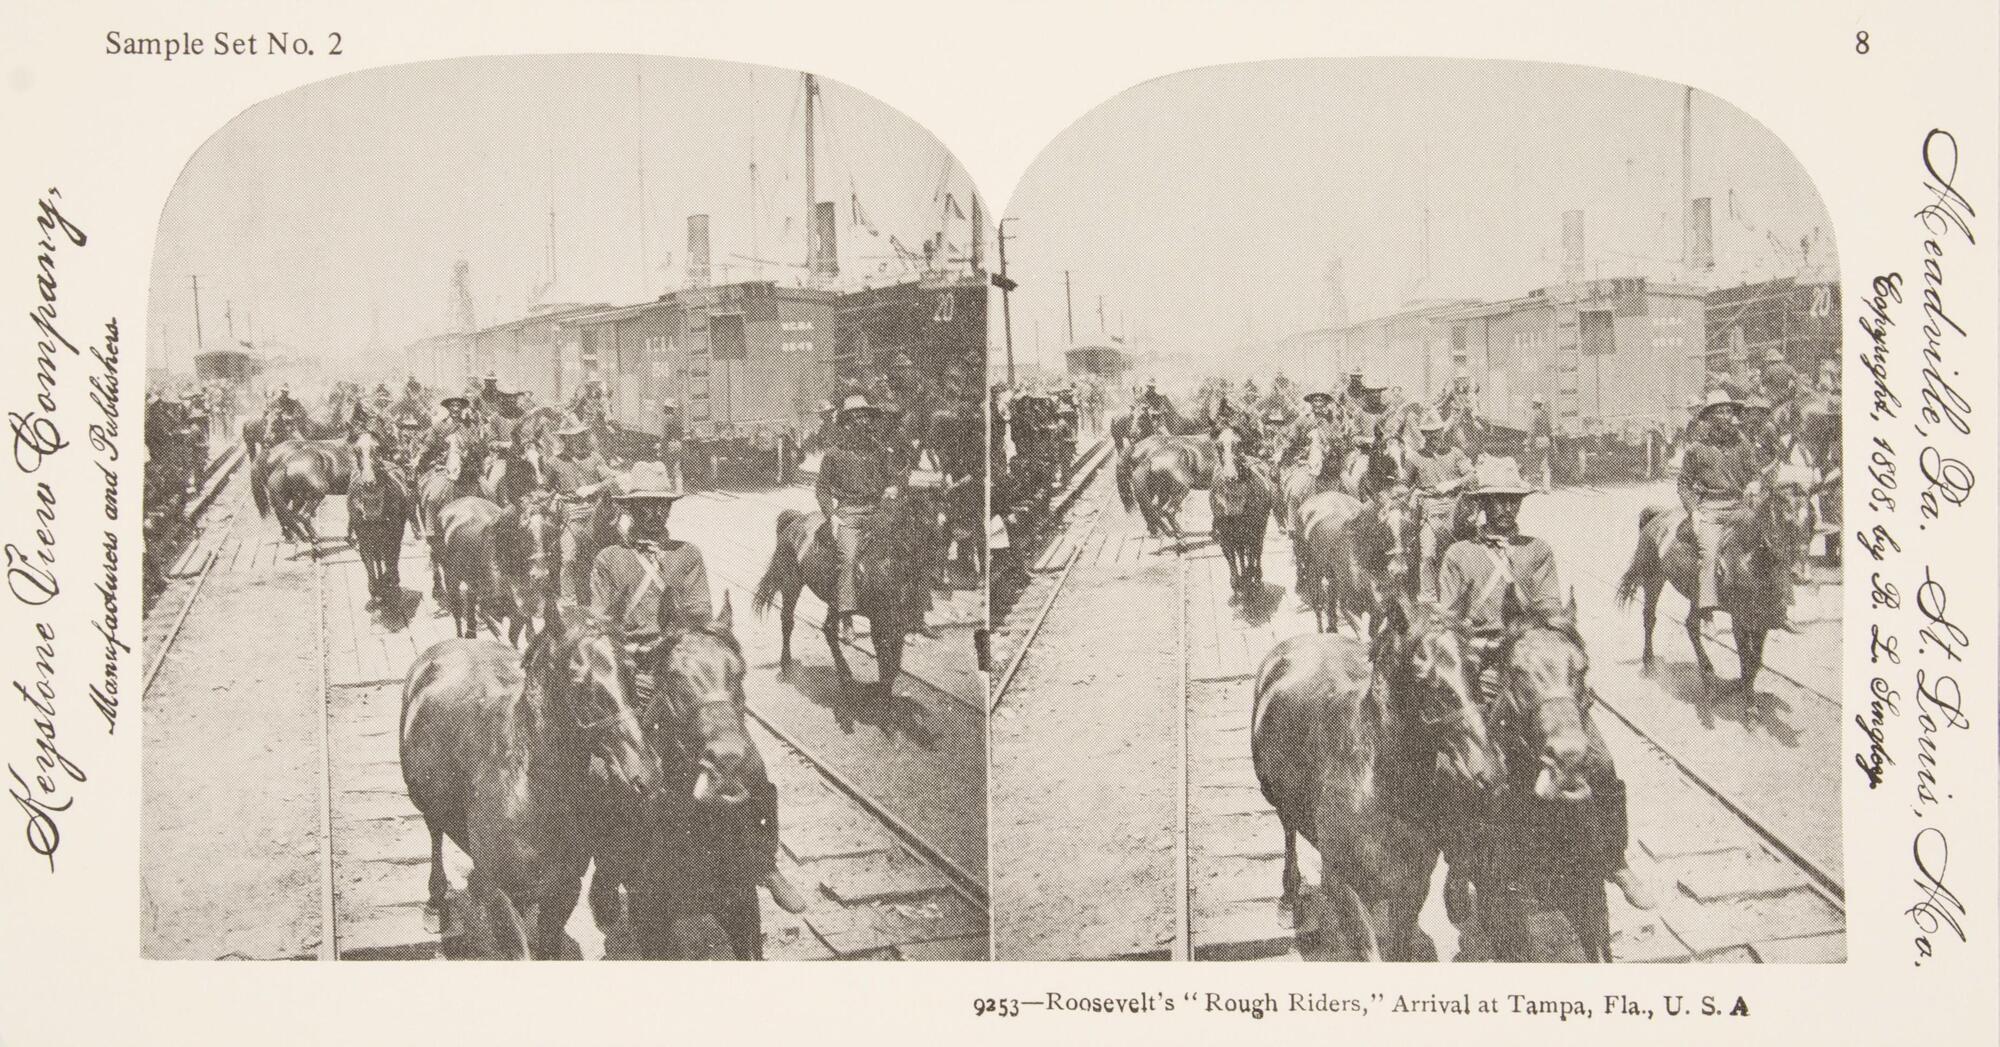 This black and white stereoscopic image features two images of a train station filled with horses being escorted by men.